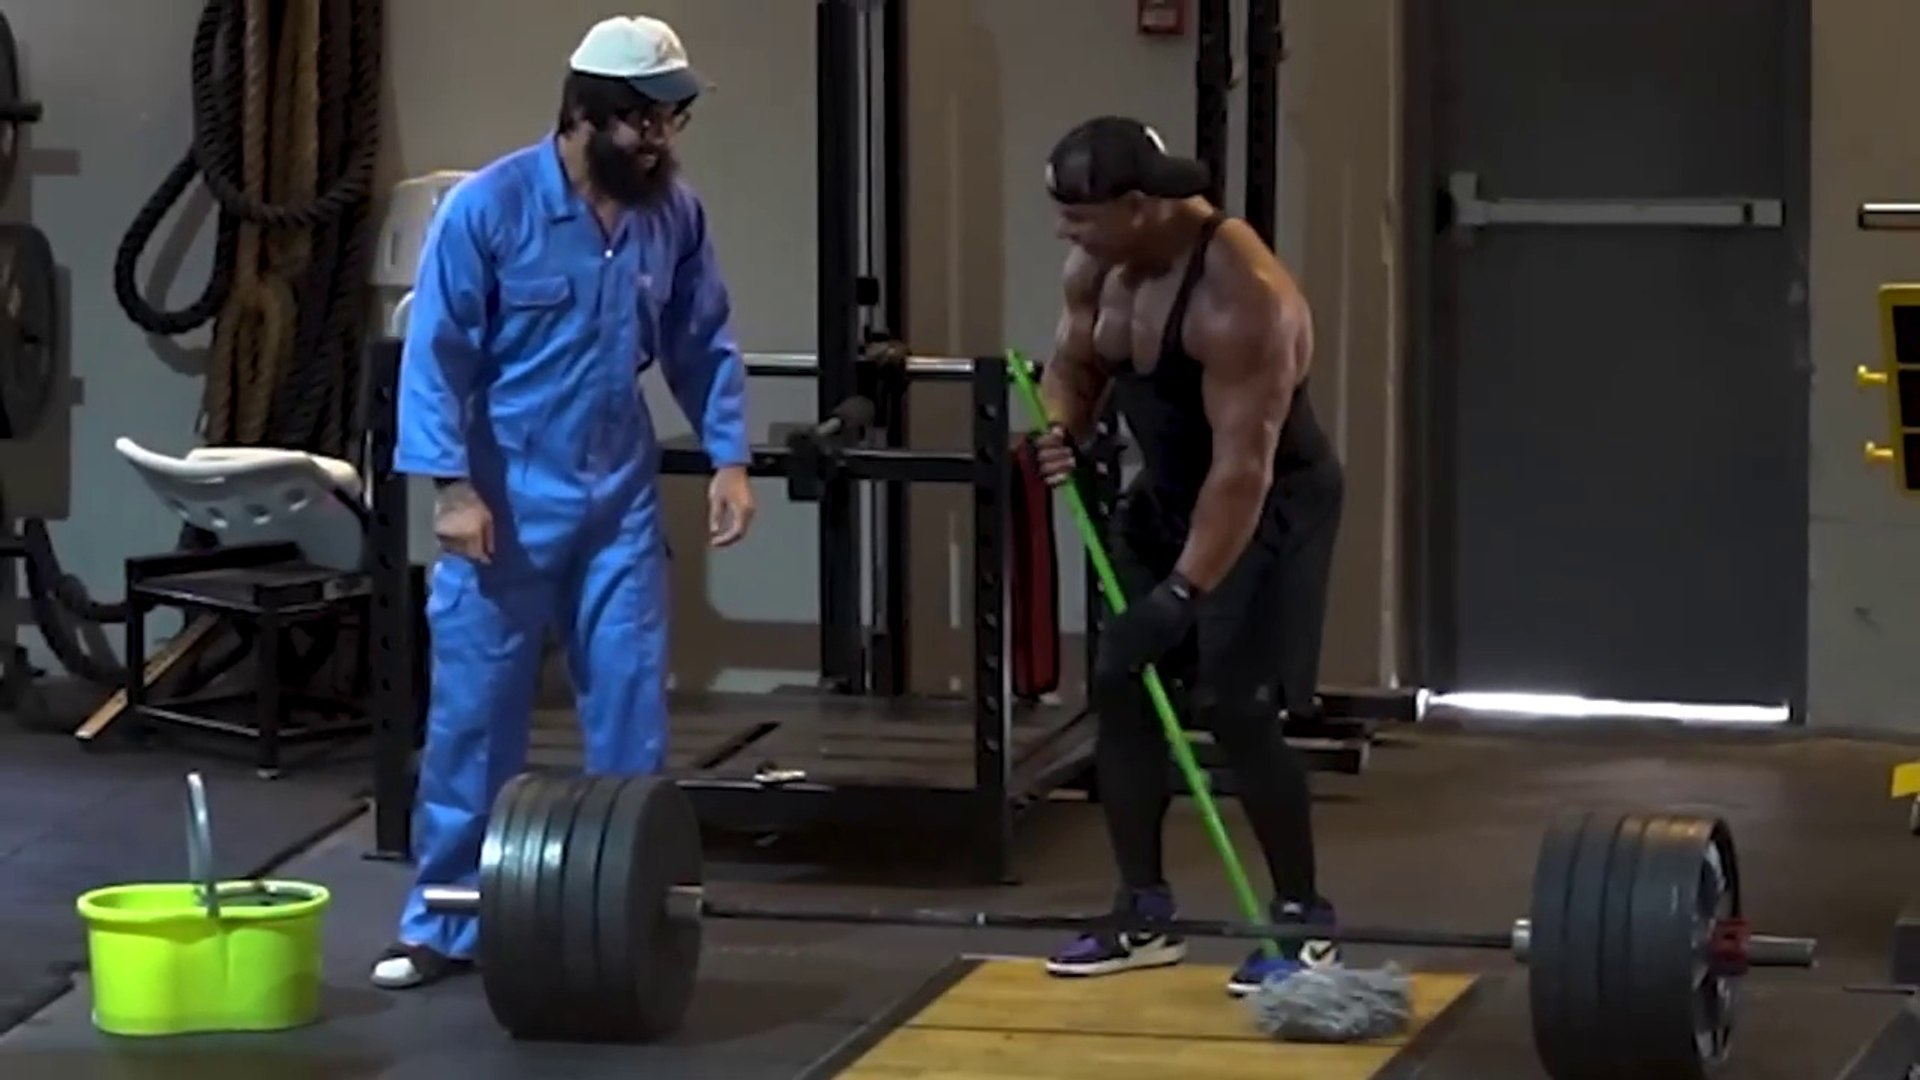 Elite Powerlifter Pretended to be a CLEANER _ Anatoly GYM PRANK - video  Dailymotion